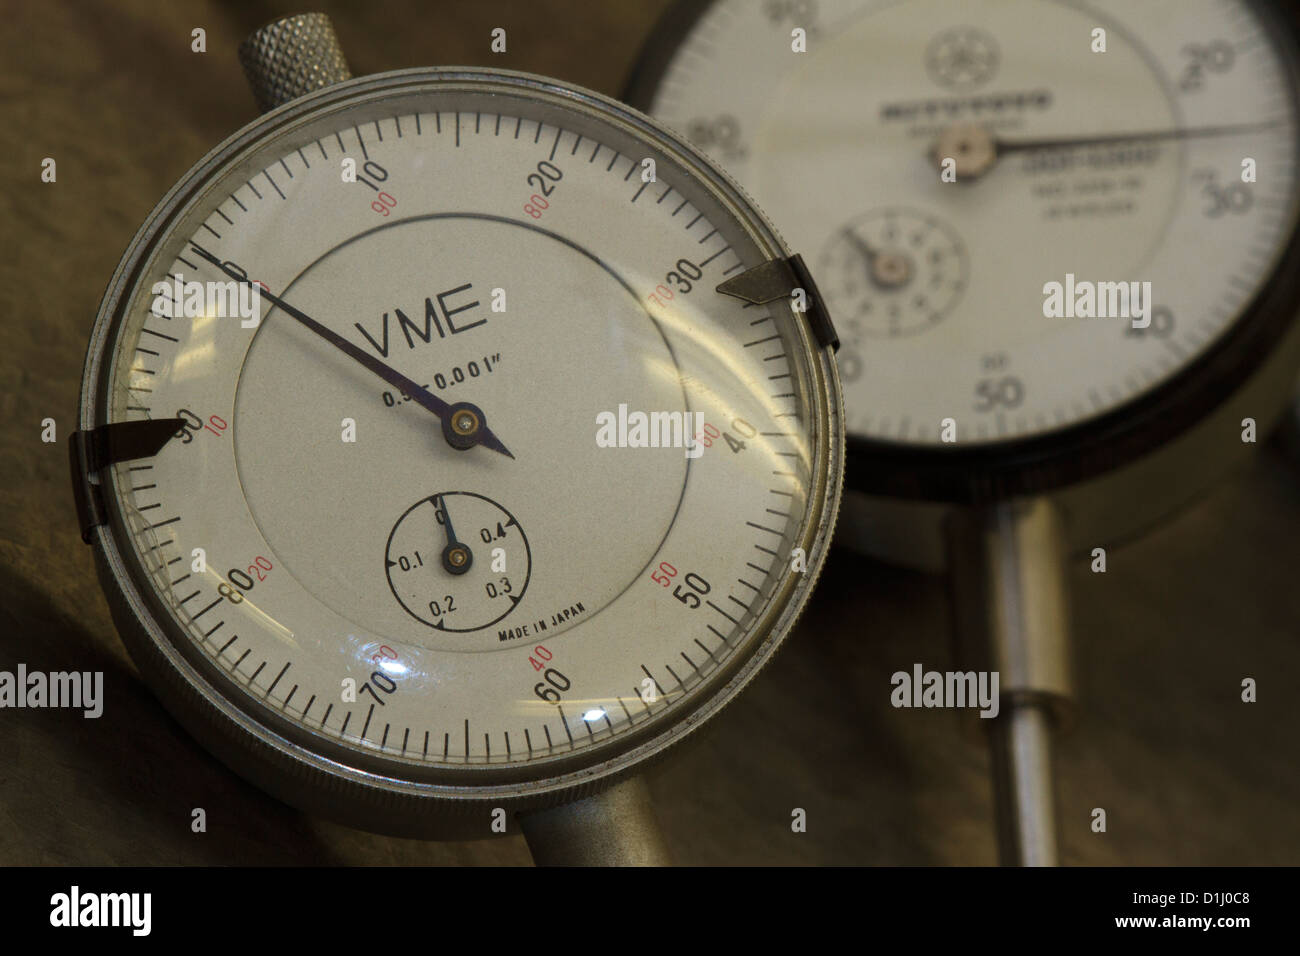 Dial on micrometer. Stock Photo